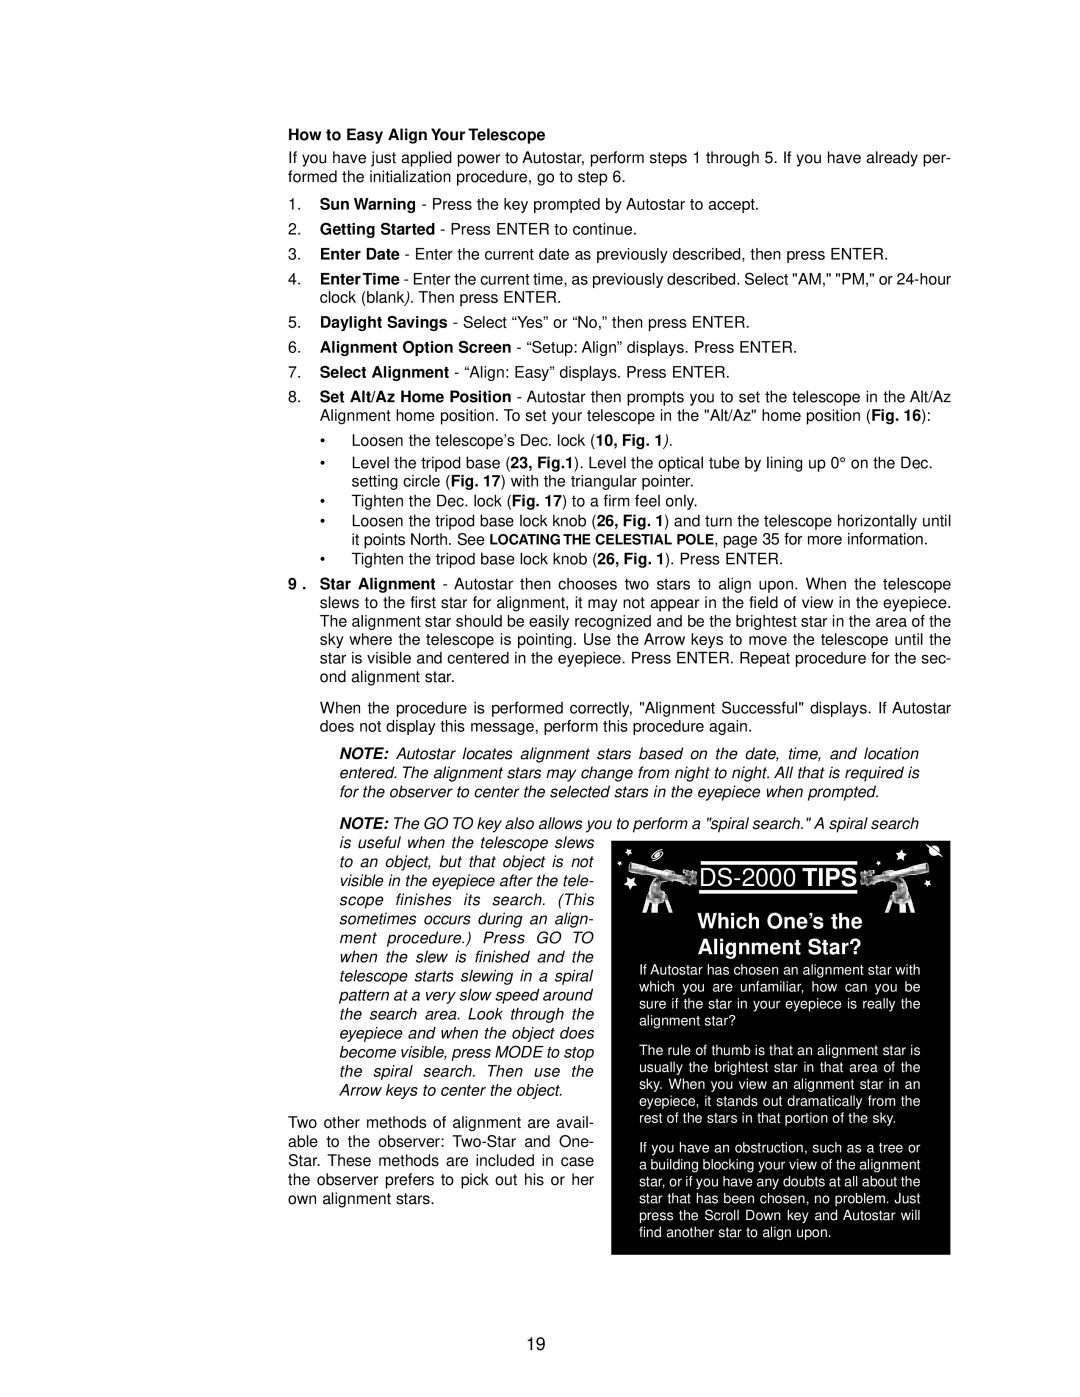 Meade instruction manual DS-2000 TIPS, Which One’s the, Alignment Star?, How to Easy Align Your Telescope 